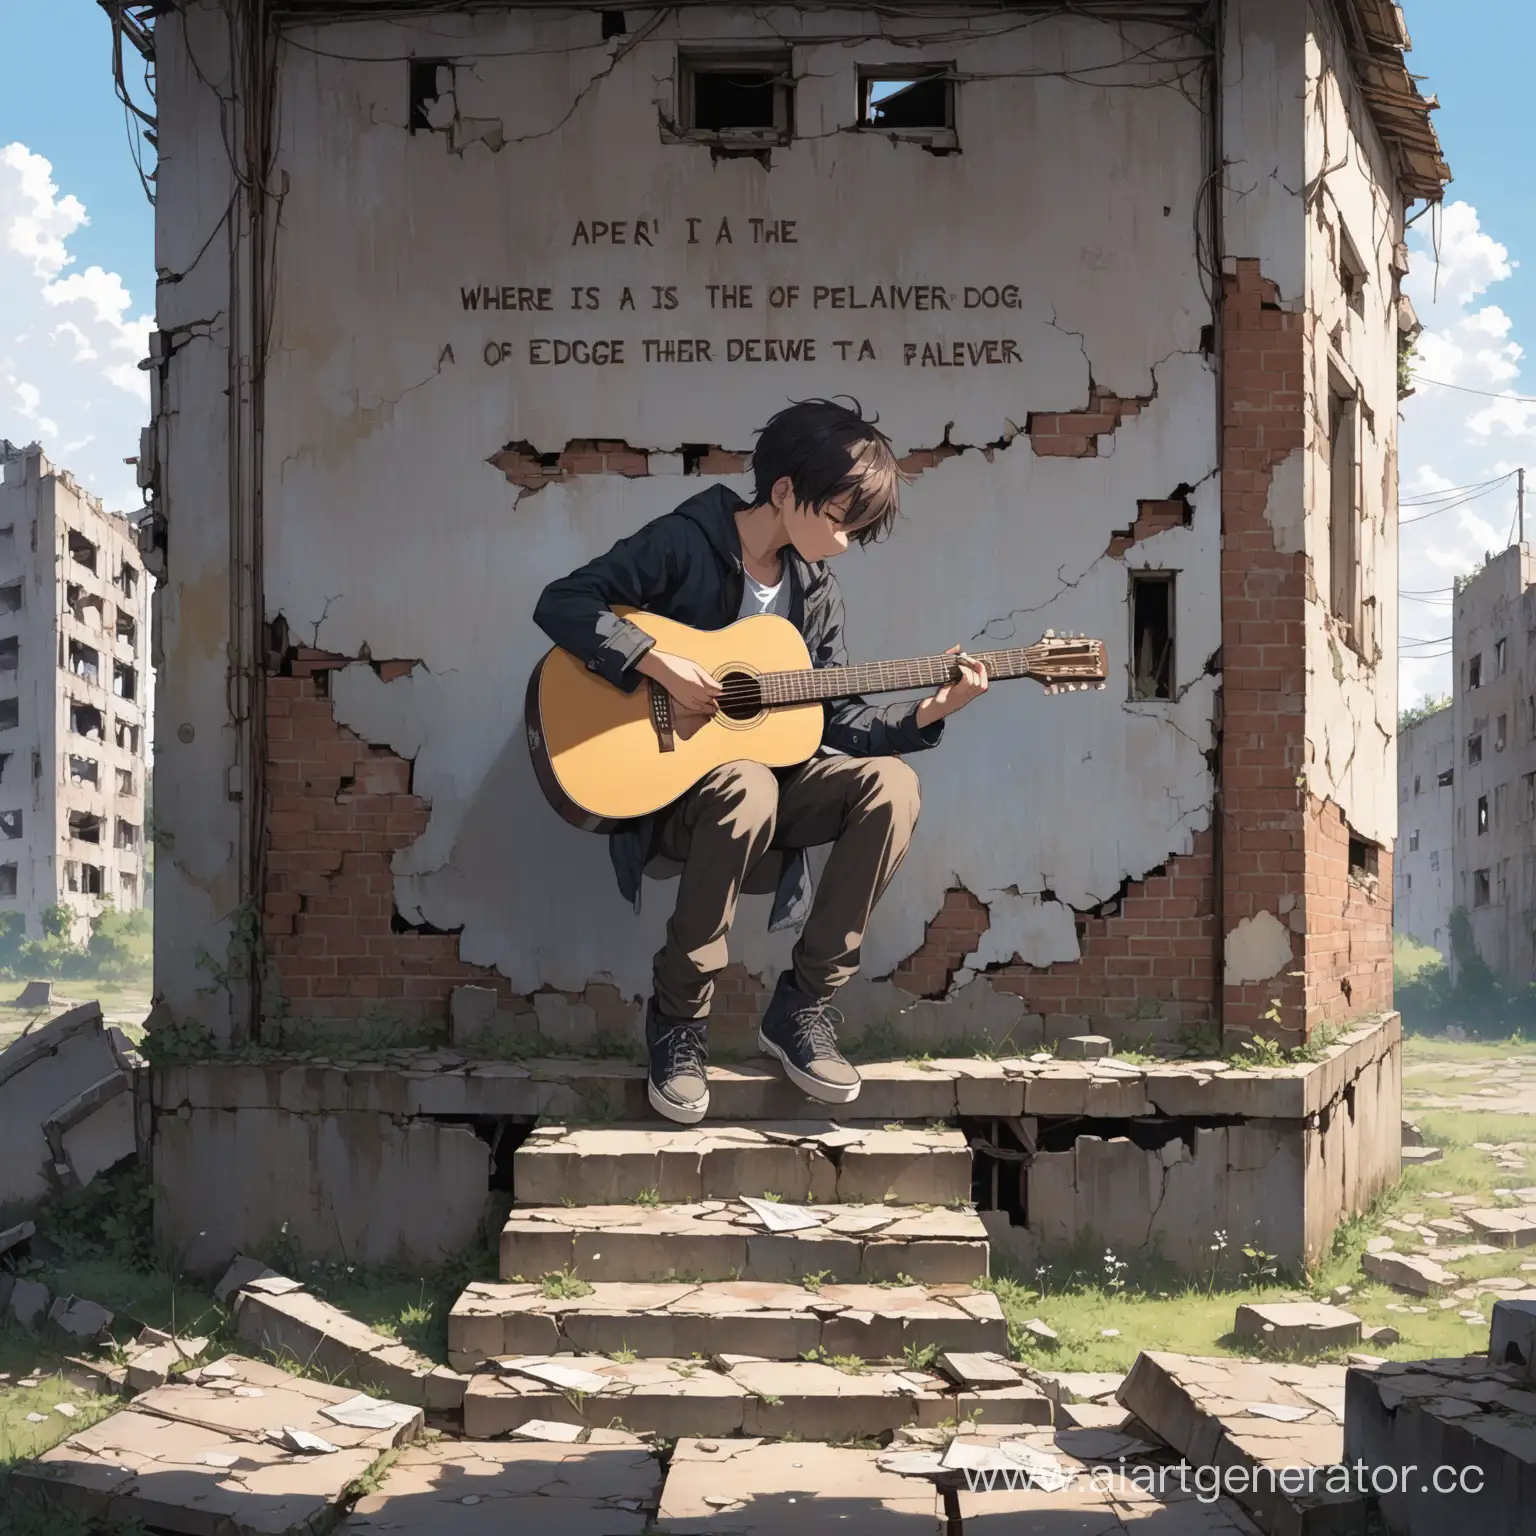 Boy-Playing-Guitar-on-Derelict-Building-with-Apelaver-Inscription